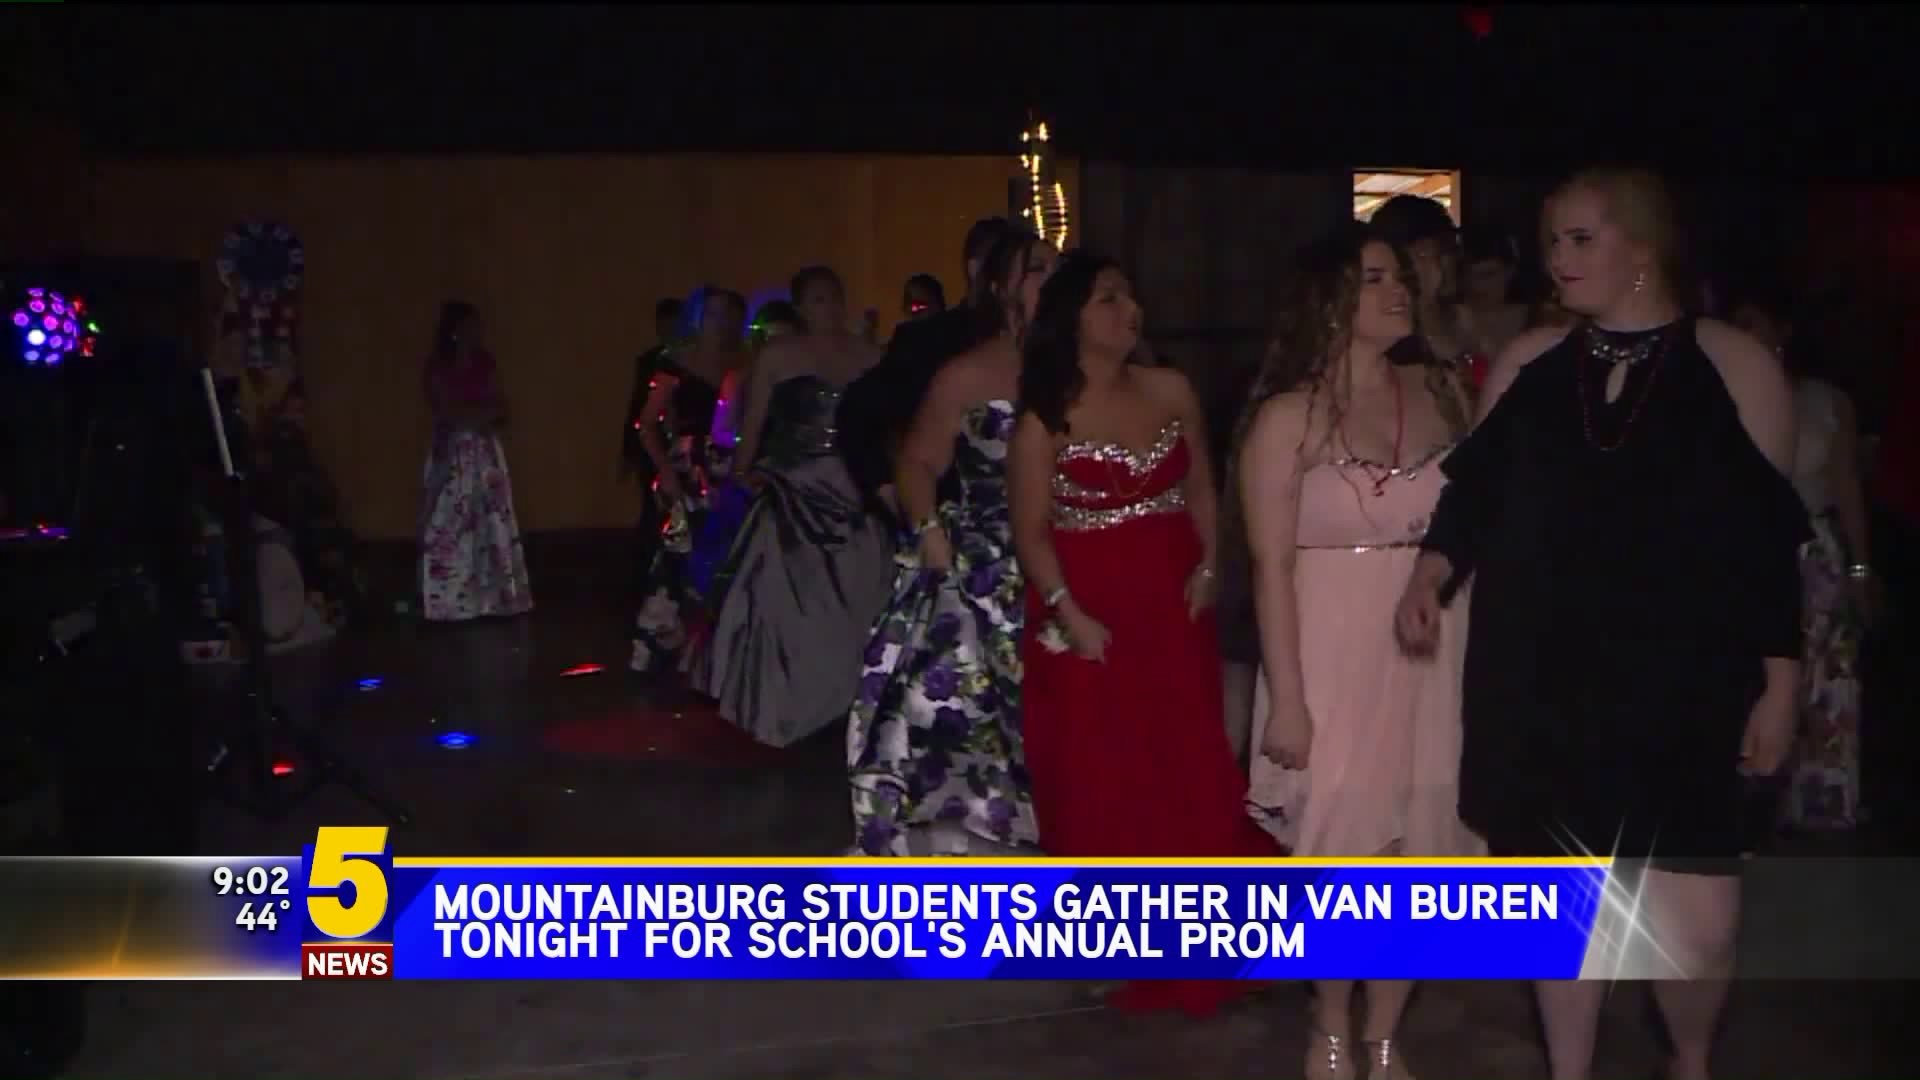 The Prom Goes On For Mountainburg Students